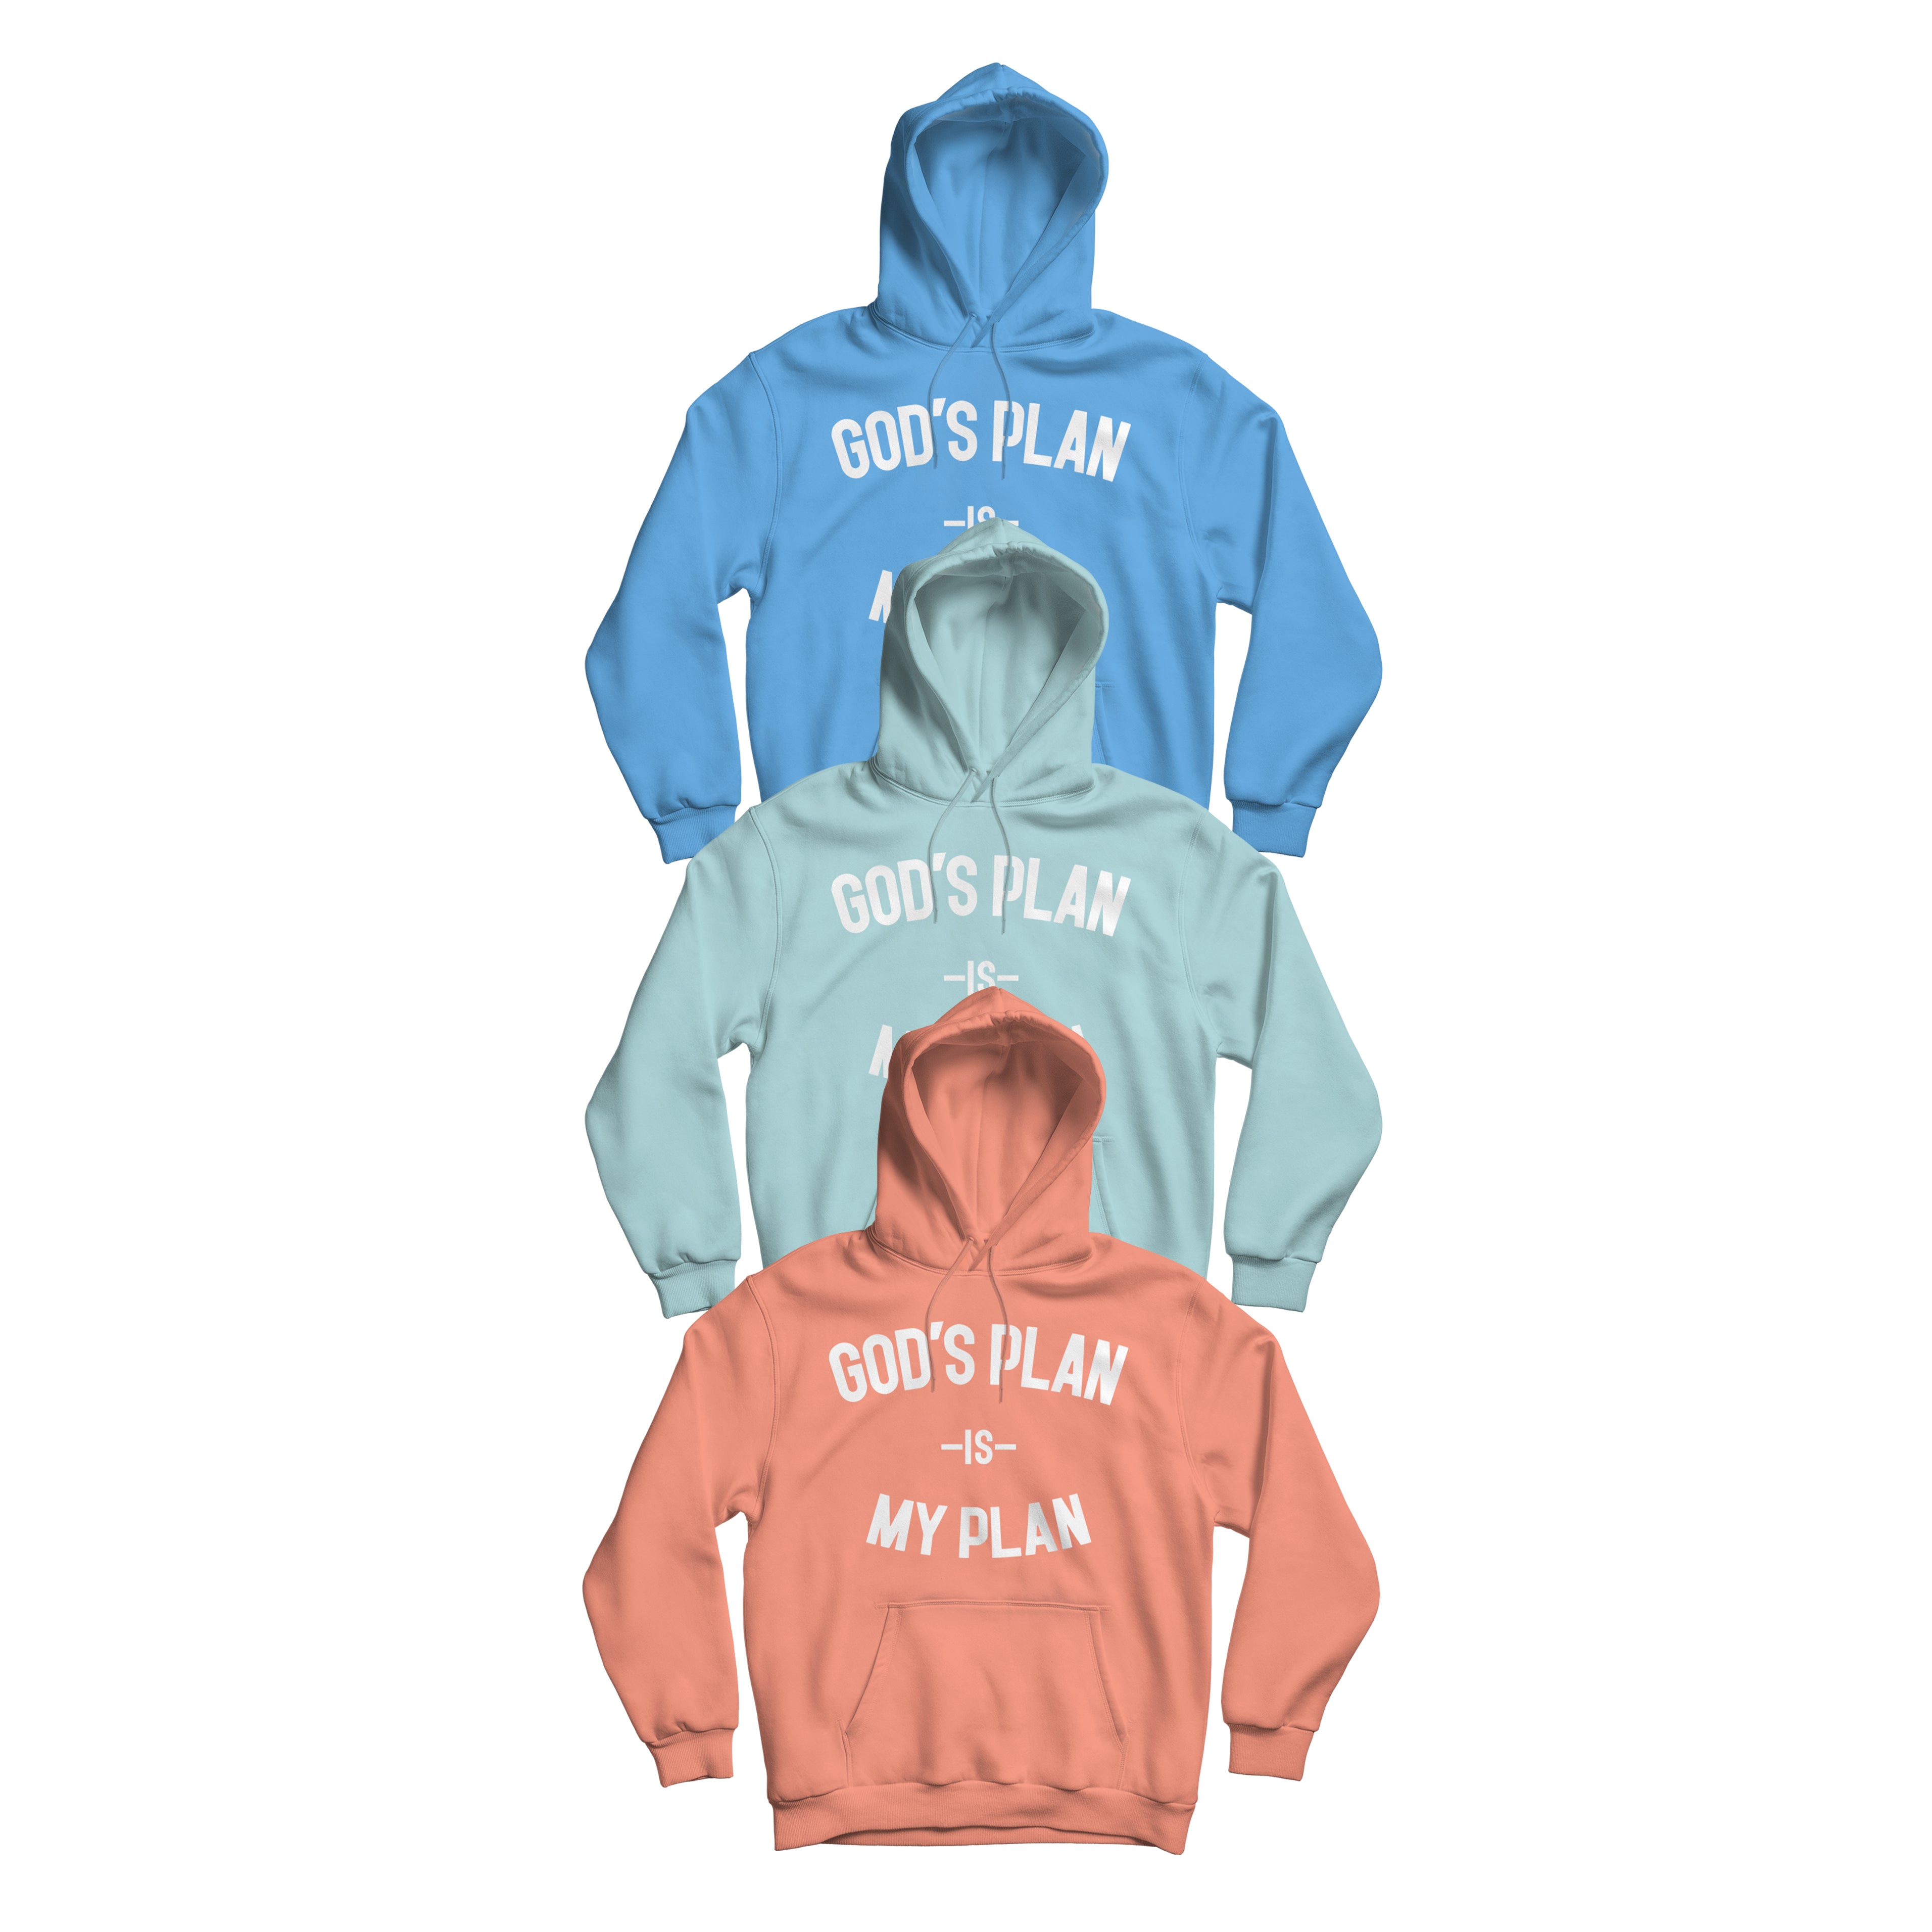 3 Hoodie Bundle God's Plan My Plan (Sage/Carolina Blue/Sunset) Used By God, Used By God Clothing, Christian Apparel, Christian Hoodies, Christian Clothing, Christian Shirts, God Shirts, Christian Sweatshirts, God Clothing, Jesus Hoodie, christian clothing t shirts, Jesus Clothes, t-shirts about jesus, hoodies near me, Christian Tshirts, God Is Dope, Art Of Homage, Red Letter Clothing, Elevated Faith, Active Faith Sports, Beacon Threads, God The Father Apparel